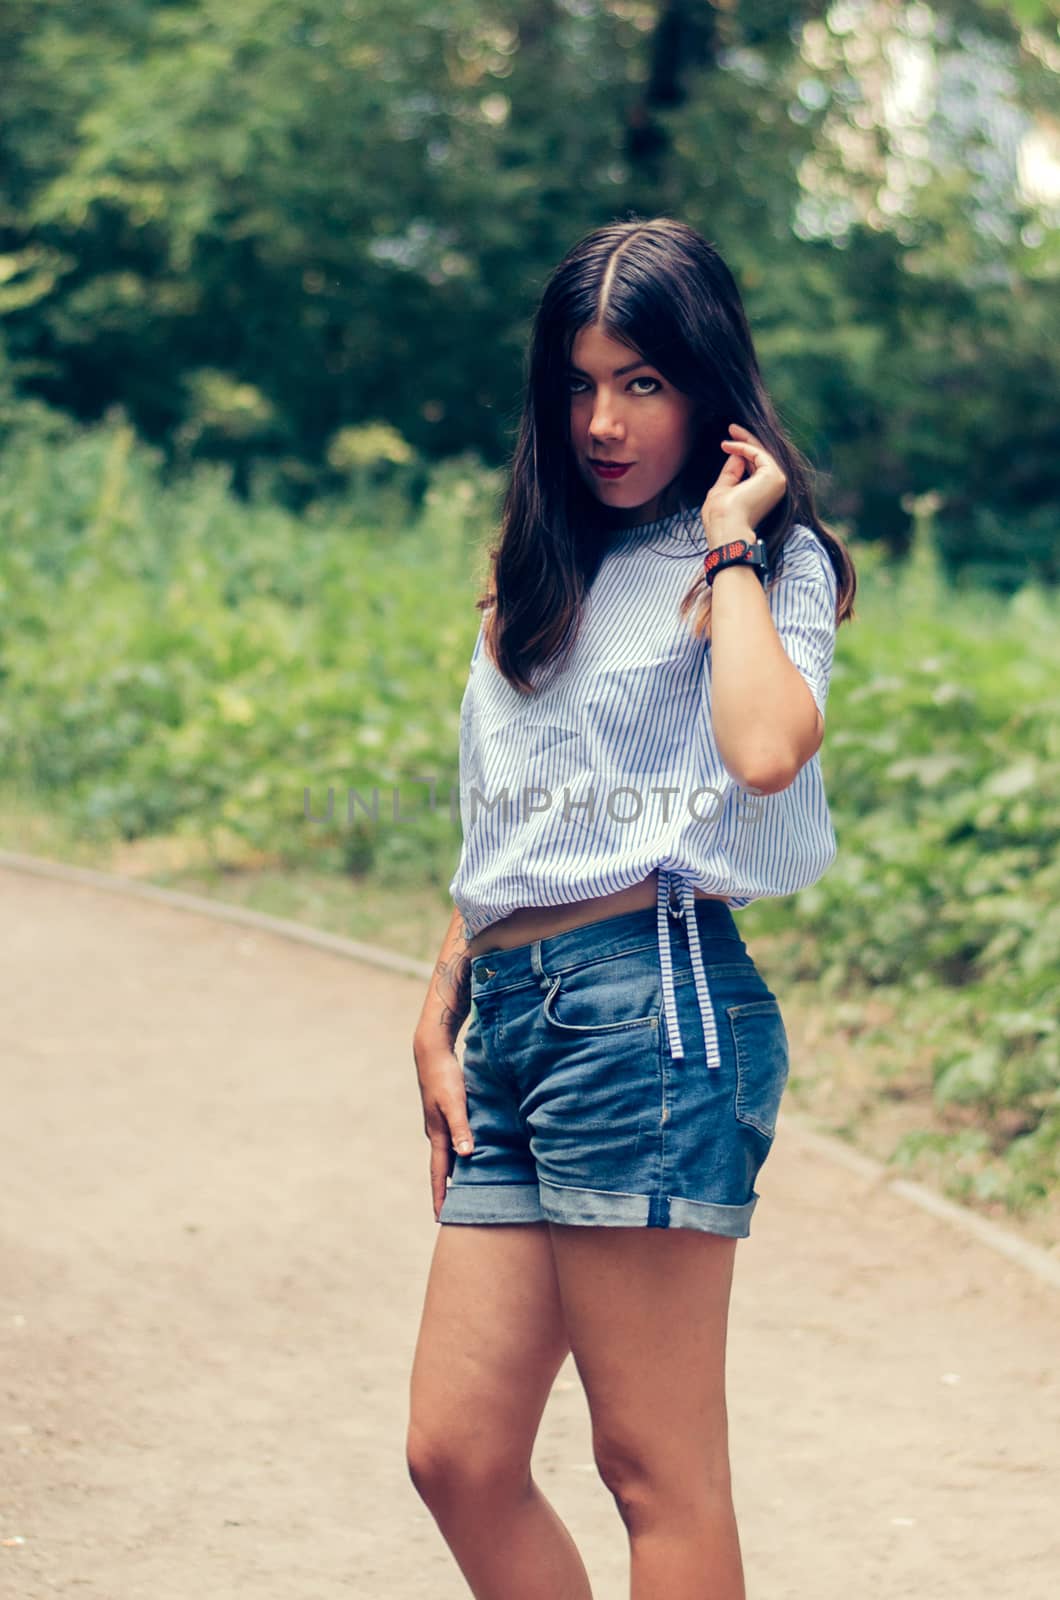 Outdoor portrait of young pretty beautiful calm woman posing outdoors in park